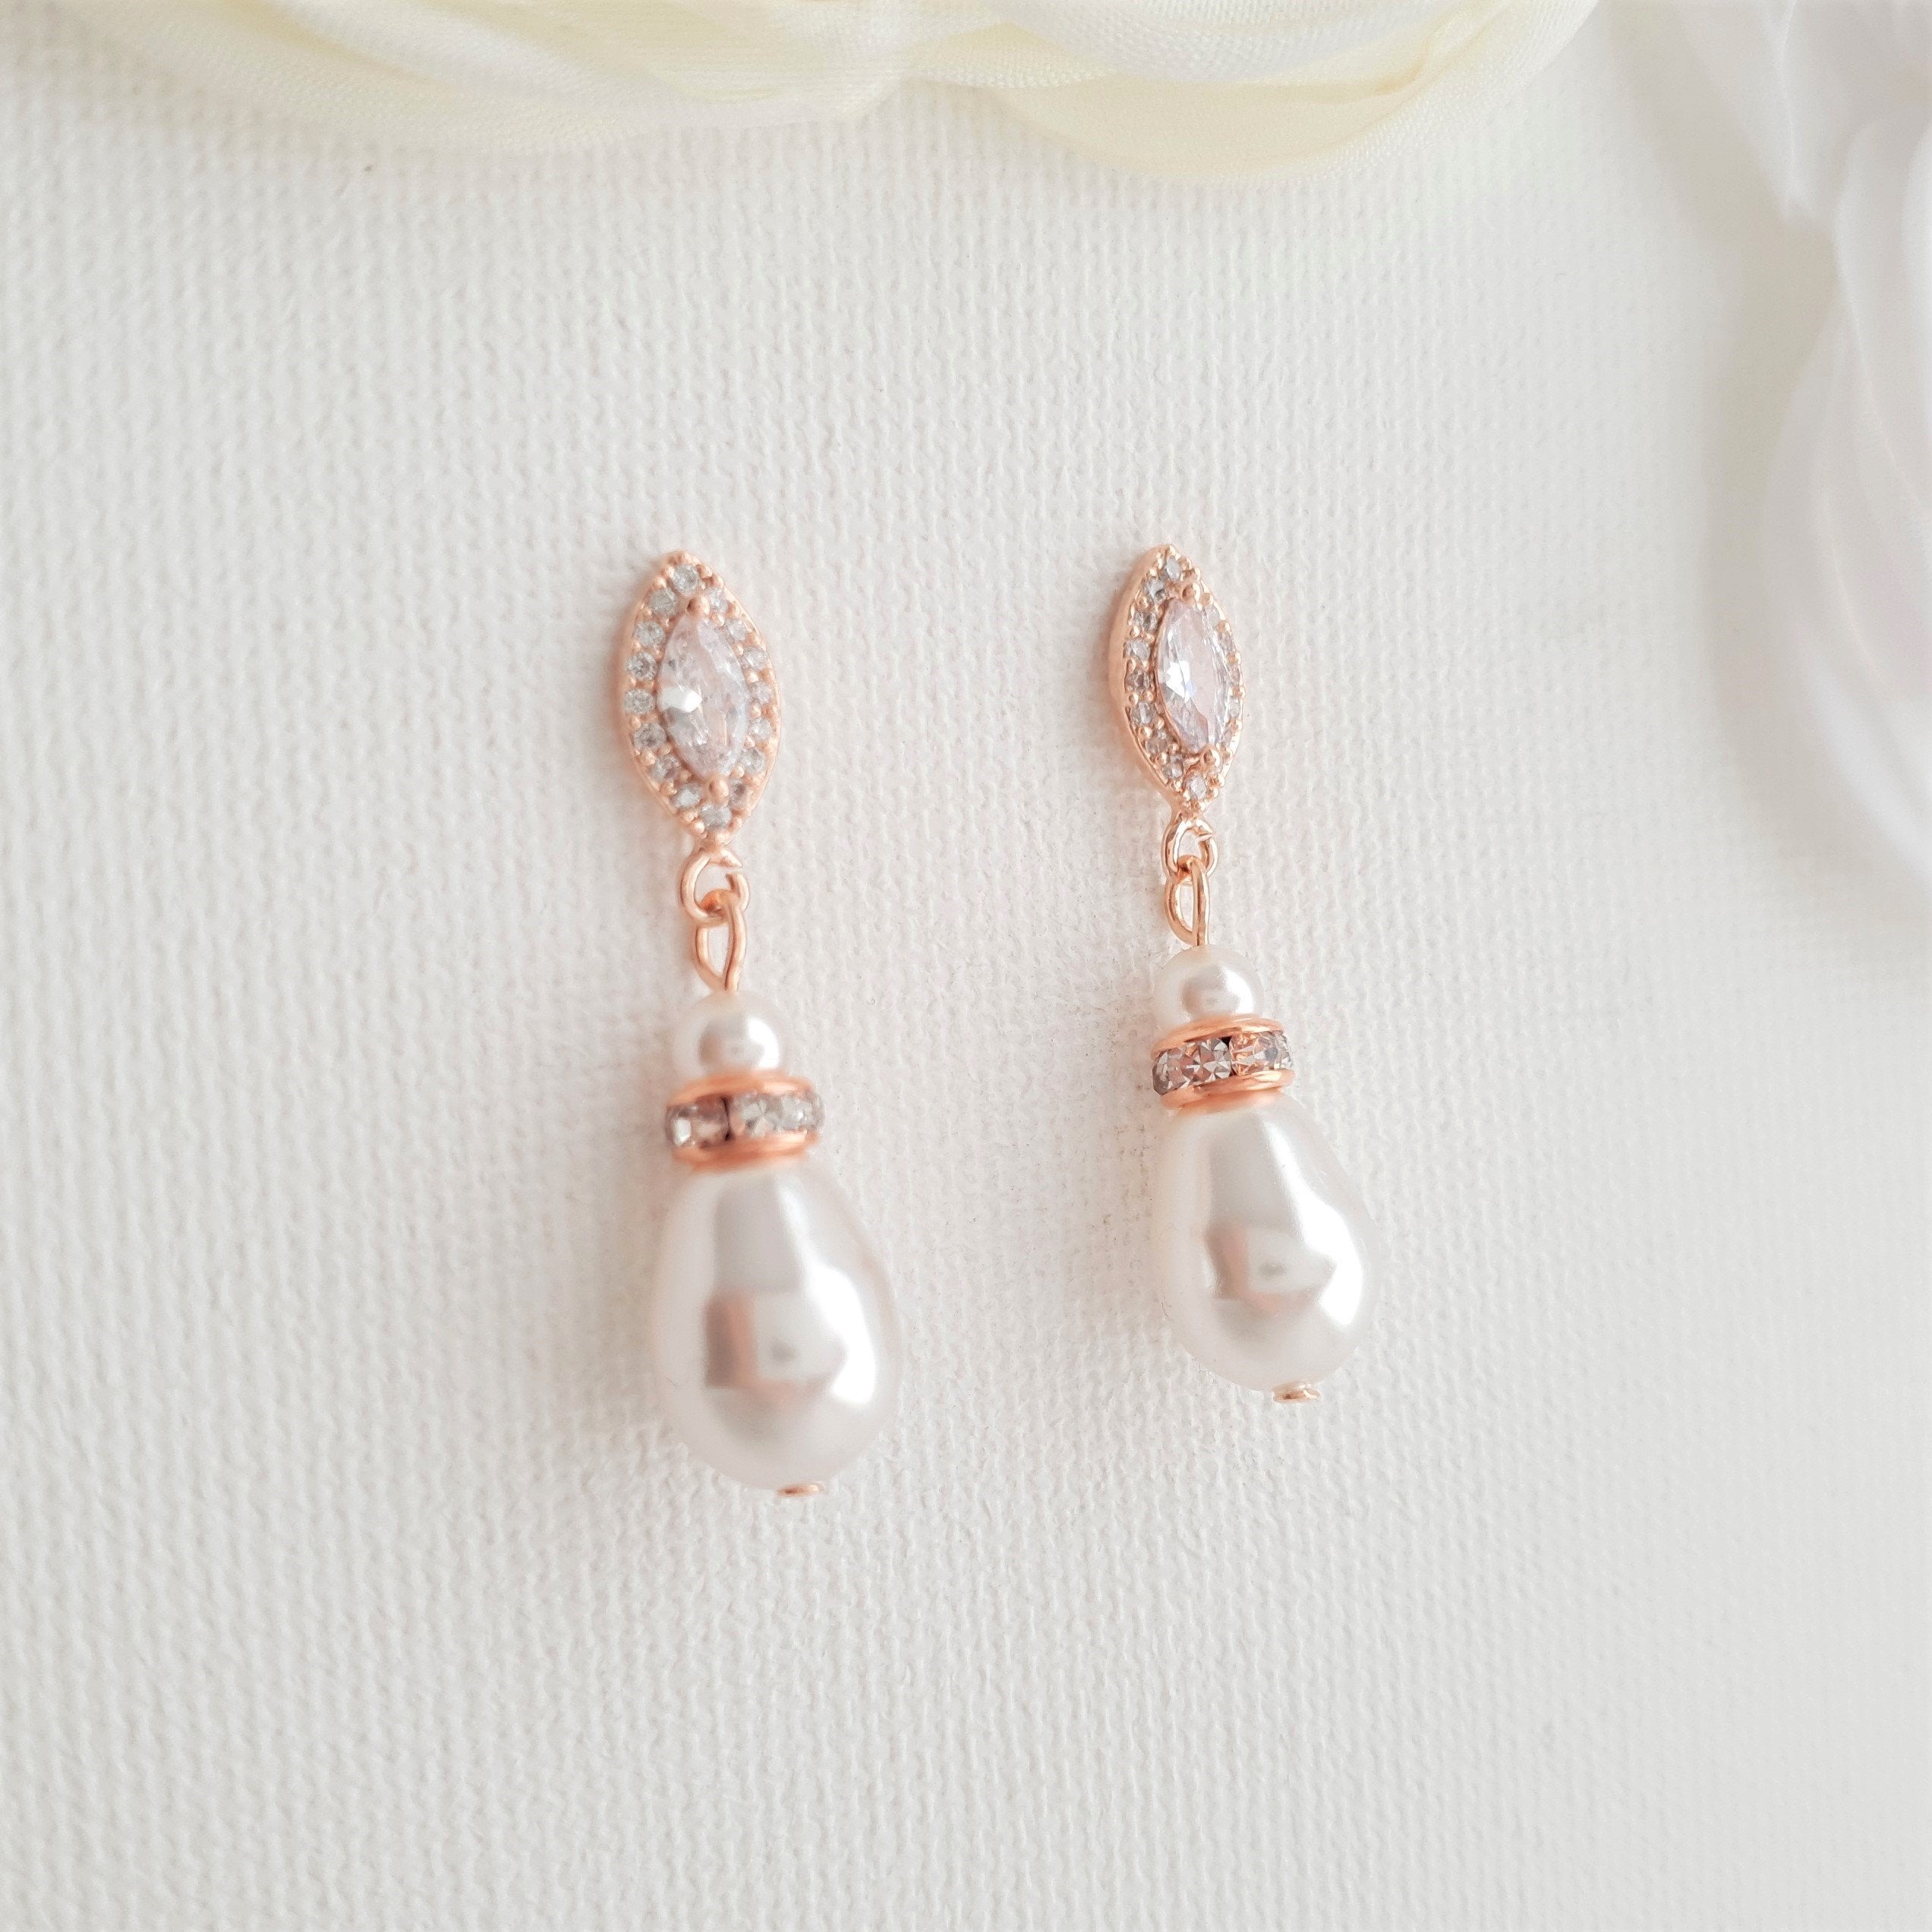 Dusty Pink Long Earrings | Bridal Jewelry for Brides and Bridesmaids -  Glitz And Love